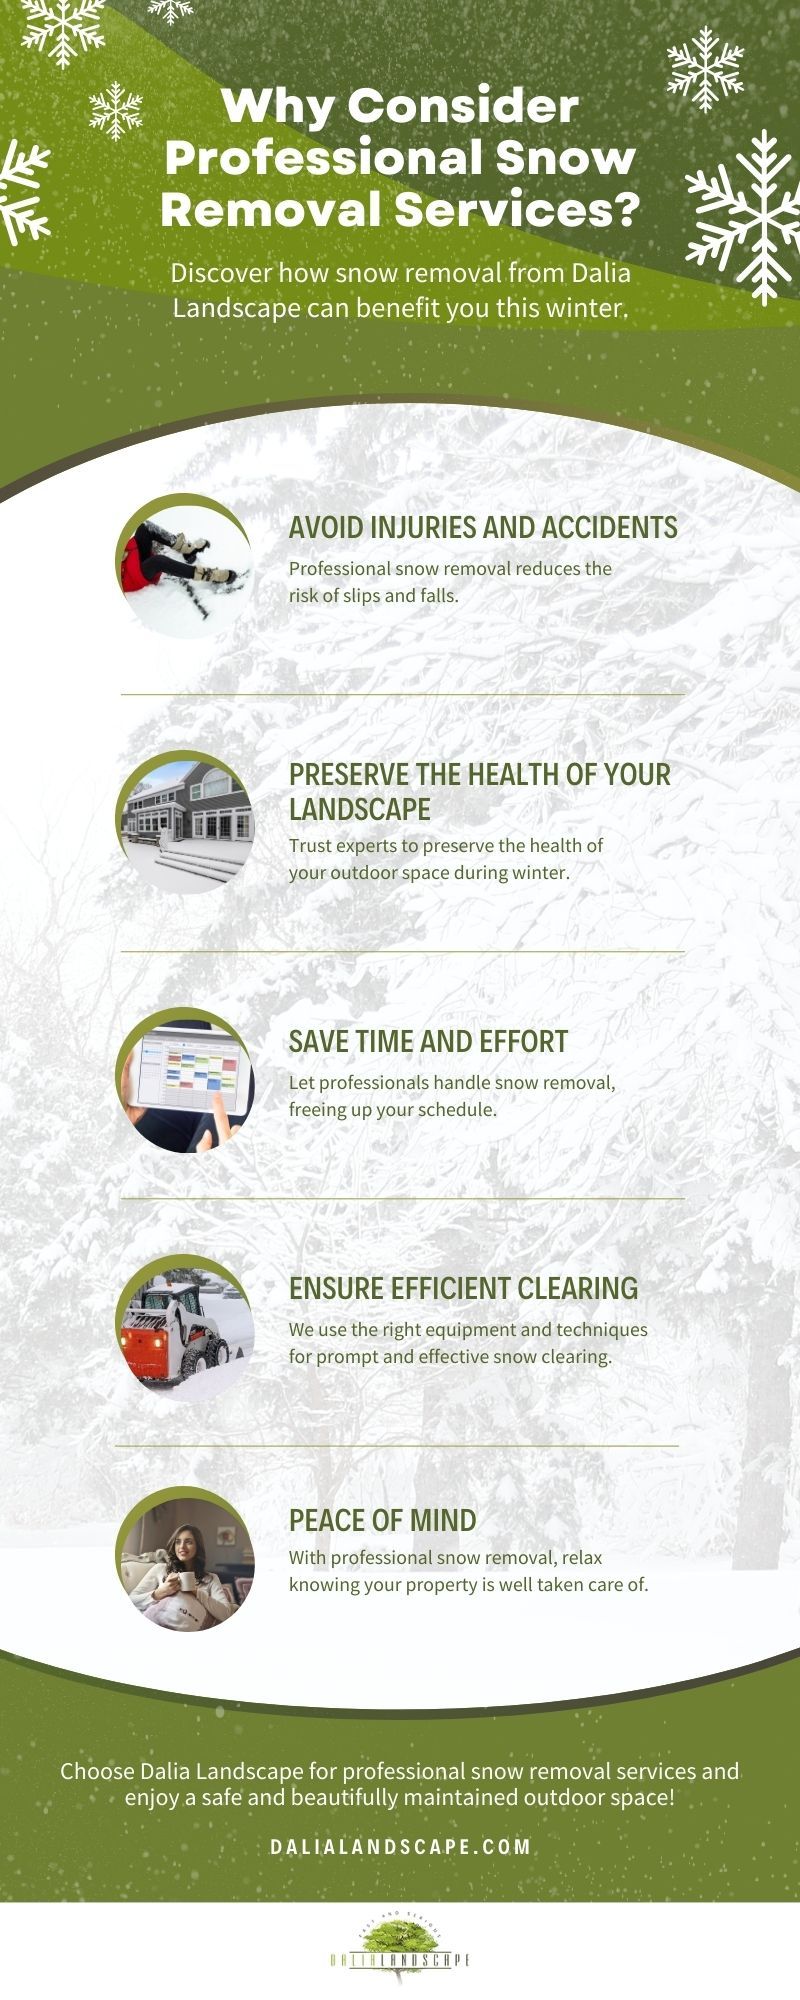 Why Consider Professional Snow Removal Services